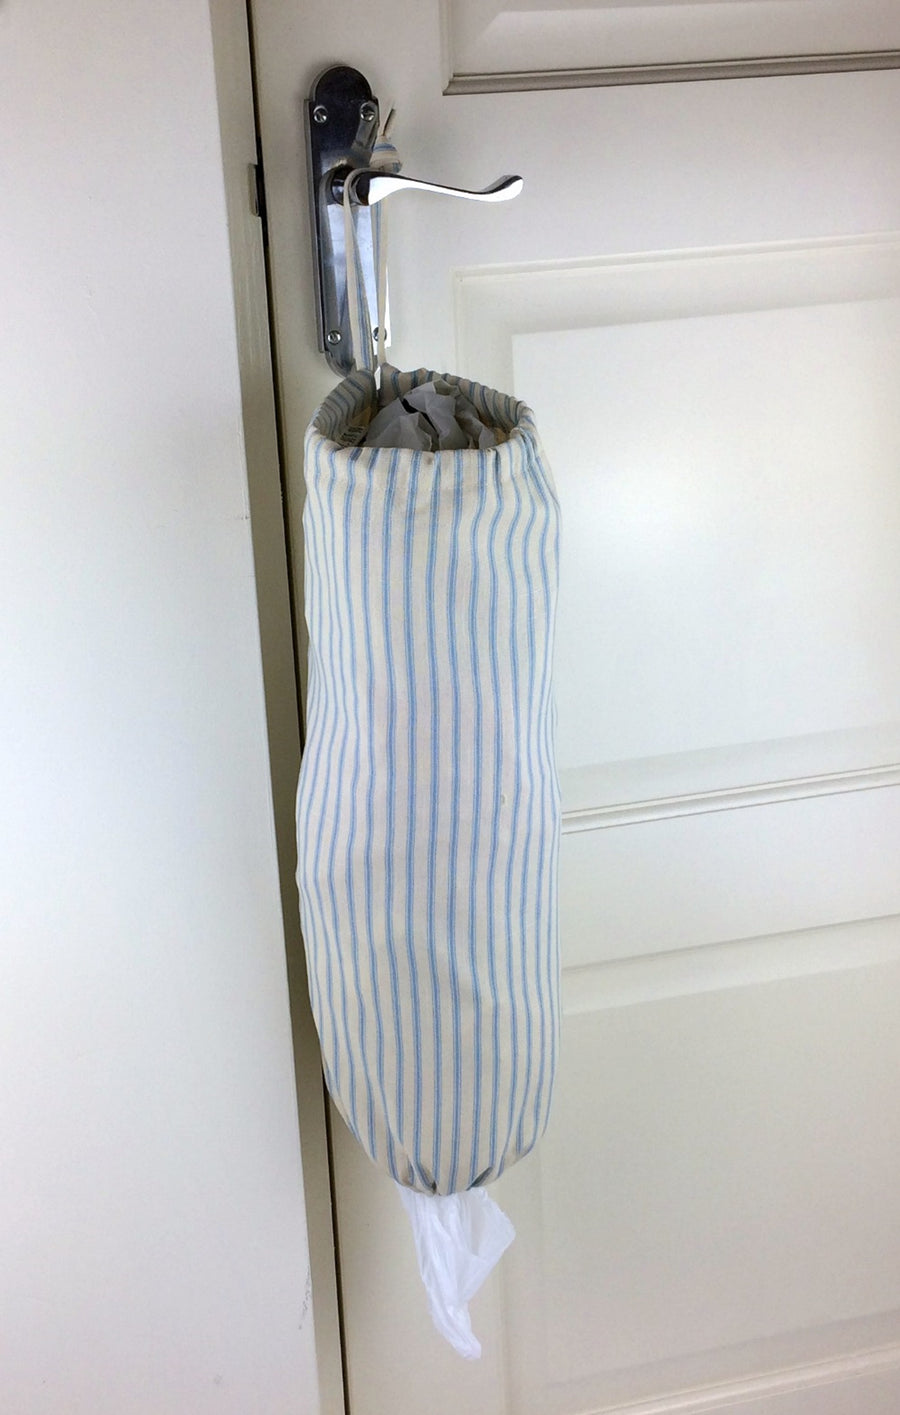 plastic bag dispenser and holder for those pesky bags for life that take over this one is light blue ticking stripe